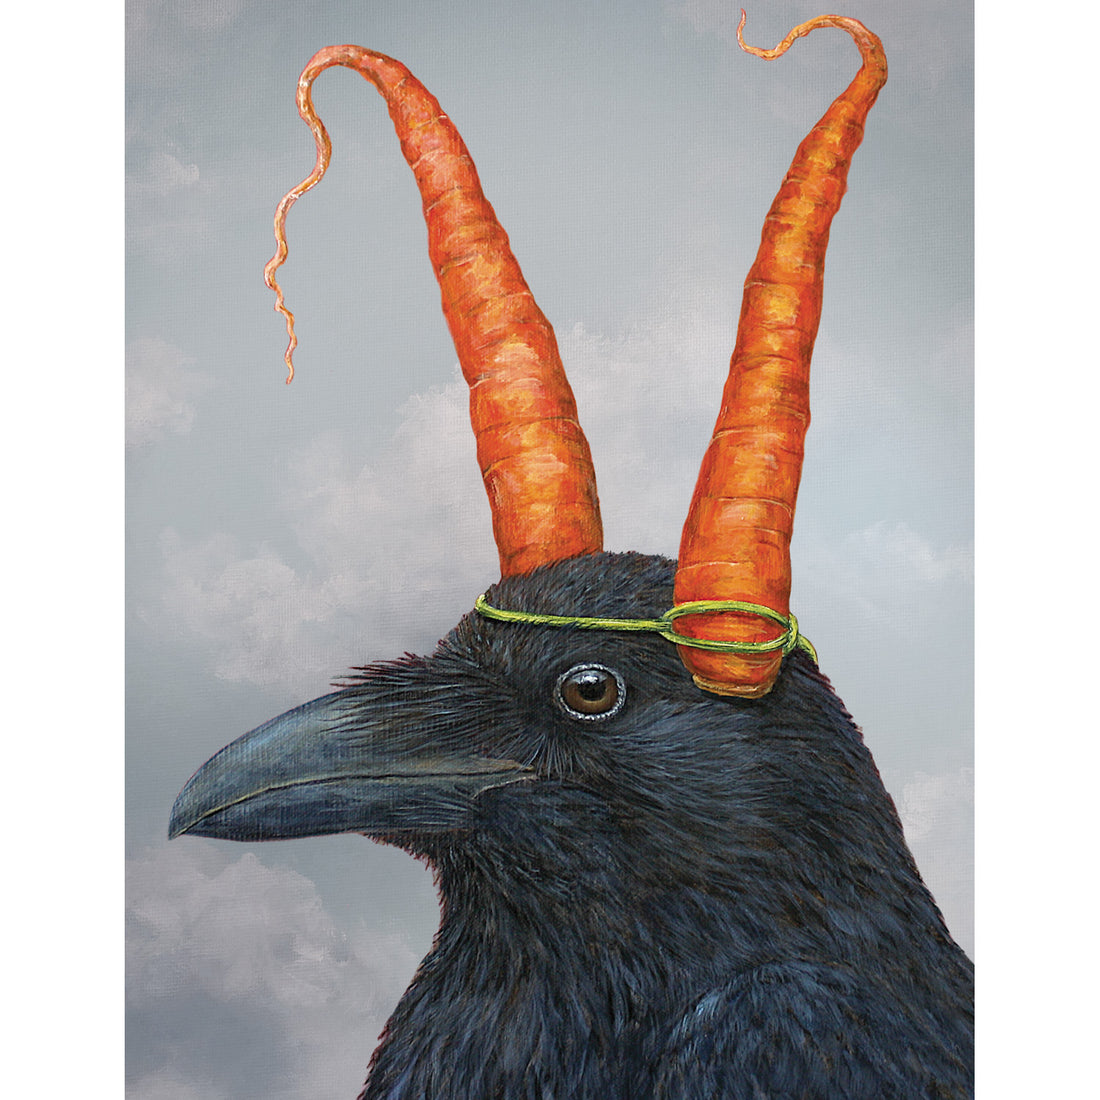 A black Nevermore Raven Card with carrot horns on its head, an artwork for the occasion by Hester &amp; Cook.